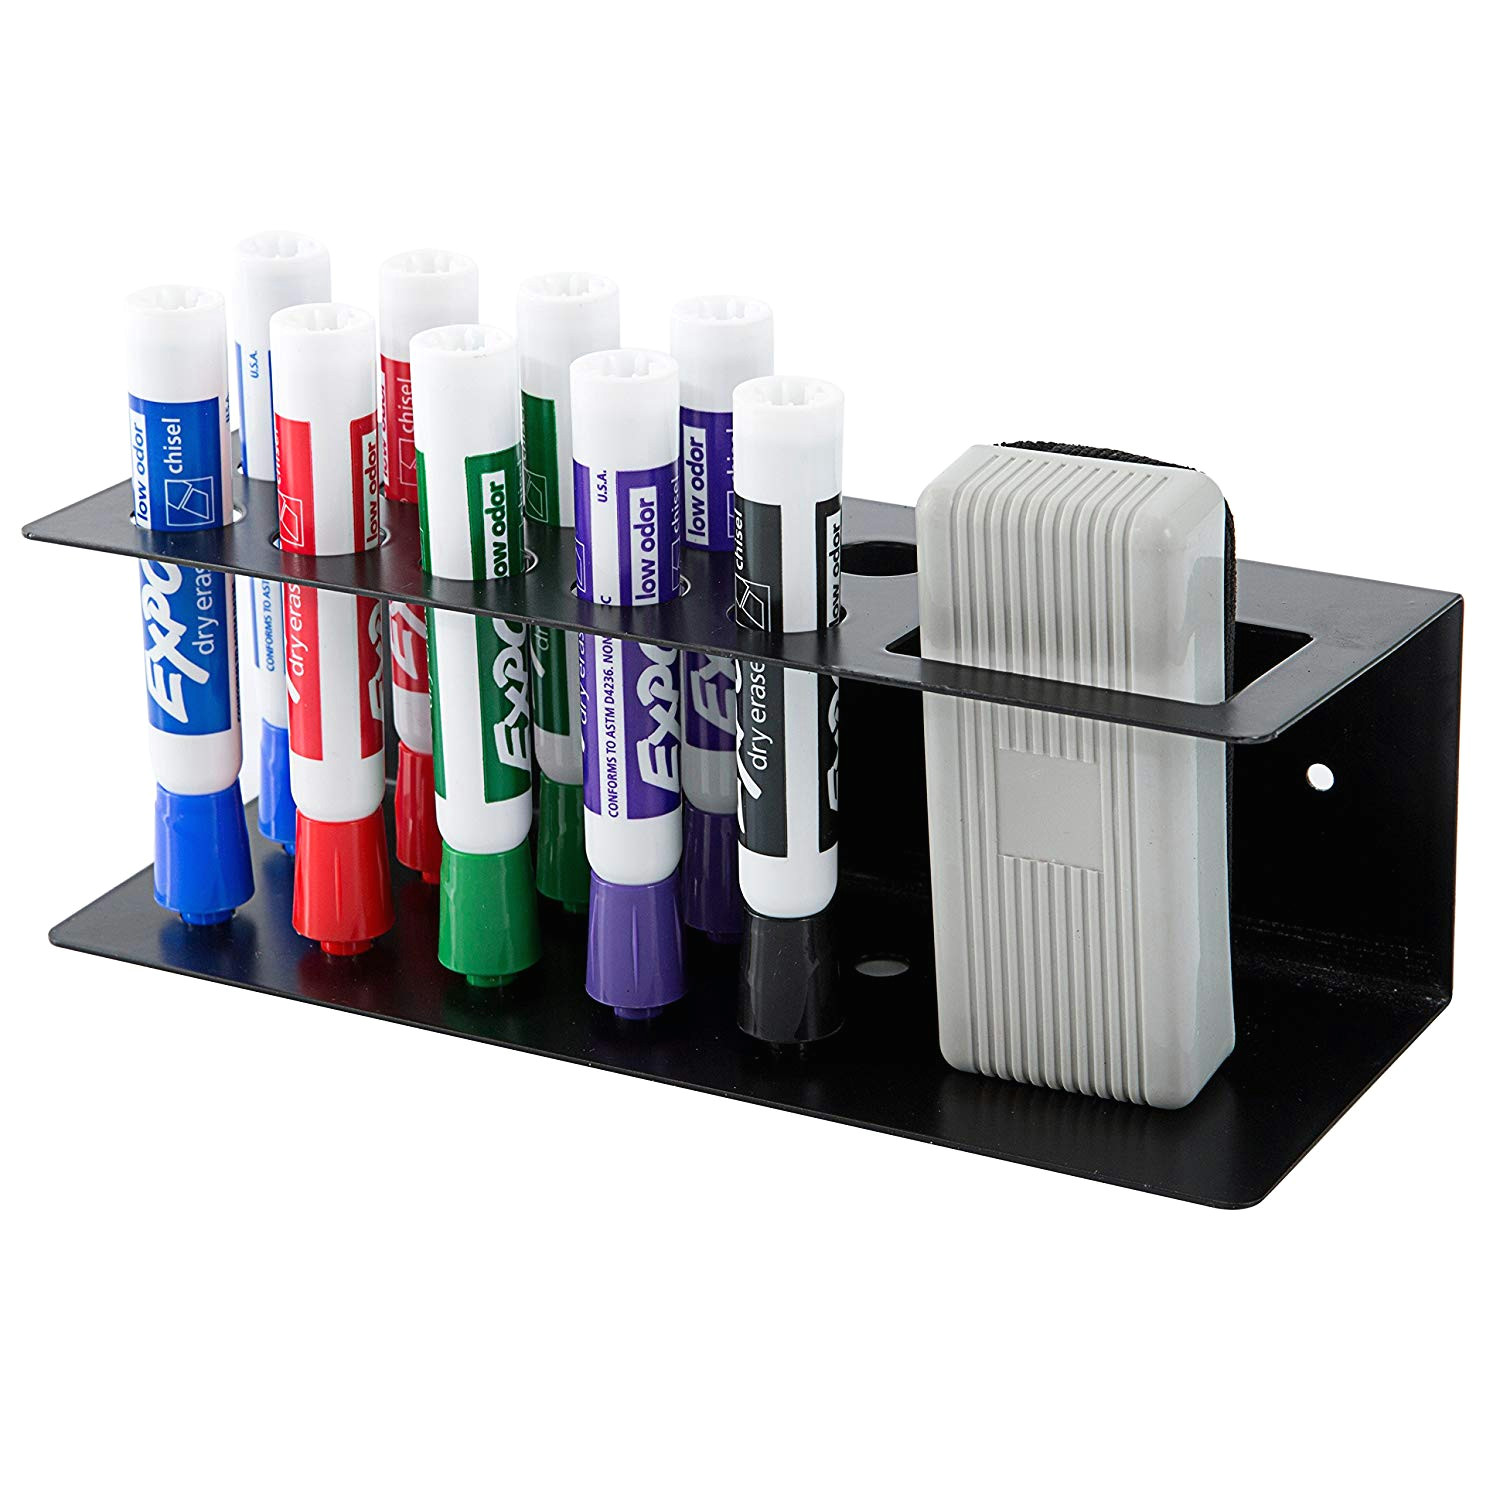 Easy Dry Erase Drawings Amazon Com 10 Slot Wall Mounted Metal Dry Erase Marker and Eraser